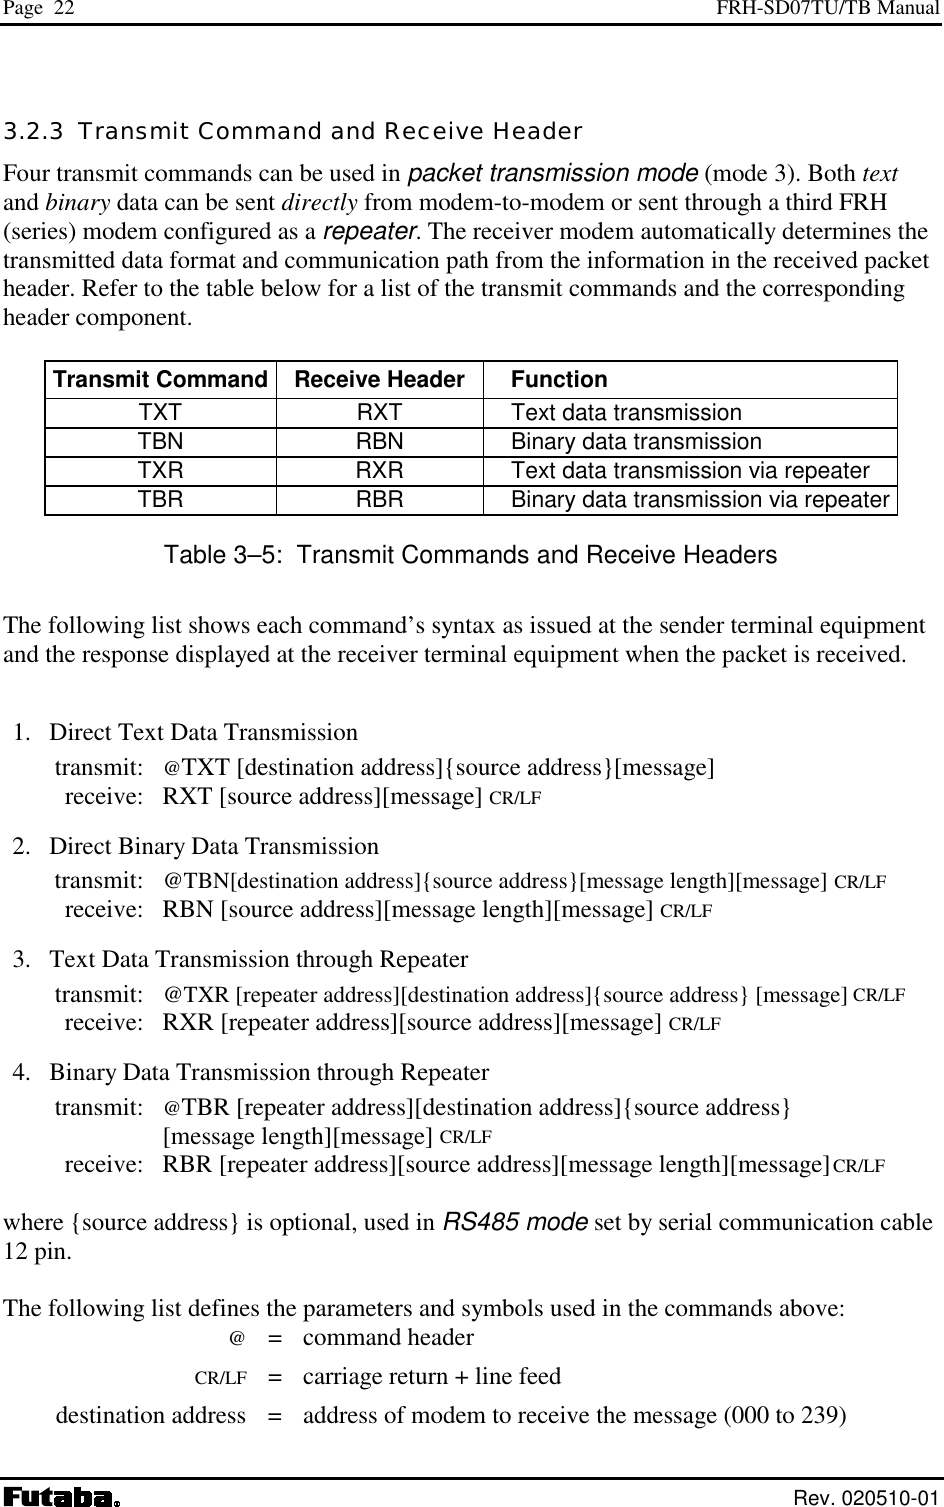 Page  22  FRH-SD07TU/TB Manual  Rev. 020510-01 3.2.3  Transmit Command and Receive Header Four transmit commands can be used in packet transmission mode (mode 3). Both text and binary data can be sent directly from modem-to-modem or sent through a third FRH (series) modem configured as a repeater. The receiver modem automatically determines the transmitted data format and communication path from the information in the received packet header. Refer to the table below for a list of the transmit commands and the corresponding header component.  Transmit Command  Receive Header   Function TXT  RXT    Text data transmission TBN  RBN    Binary data transmission TXR  RXR    Text data transmission via repeater TBR  RBR    Binary data transmission via repeater Table 3–5:  Transmit Commands and Receive Headers The following list shows each command’s syntax as issued at the sender terminal equipment and the response displayed at the receiver terminal equipment when the packet is received.   1.  Direct Text Data Transmission  transmit: @TXT [destination address]{source address}[message]    receive:  RXT [source address][message] CR/LF  2.  Direct Binary Data Transmission  transmit: @TBN[destination address]{source address}[message length][message] CR/LF   receive:  RBN [source address][message length][message] CR/LF  3.  Text Data Transmission through Repeater  transmit: @TXR [repeater address][destination address]{source address} [message] CR/LF   receive:  RXR [repeater address][source address][message] CR/LF  4.  Binary Data Transmission through Repeater  transmit: @TBR [repeater address][destination address]{source address}    [message length][message] CR/LF   receive:  RBR [repeater address][source address][message length][message] CR/LF  where {source address} is optional, used in RS485 mode set by serial communication cable 12 pin.  The following list defines the parameters and symbols used in the commands above:  @ = command header  CR/LF  =  carriage return + line feed   destination address  =  address of modem to receive the message (000 to 239) 